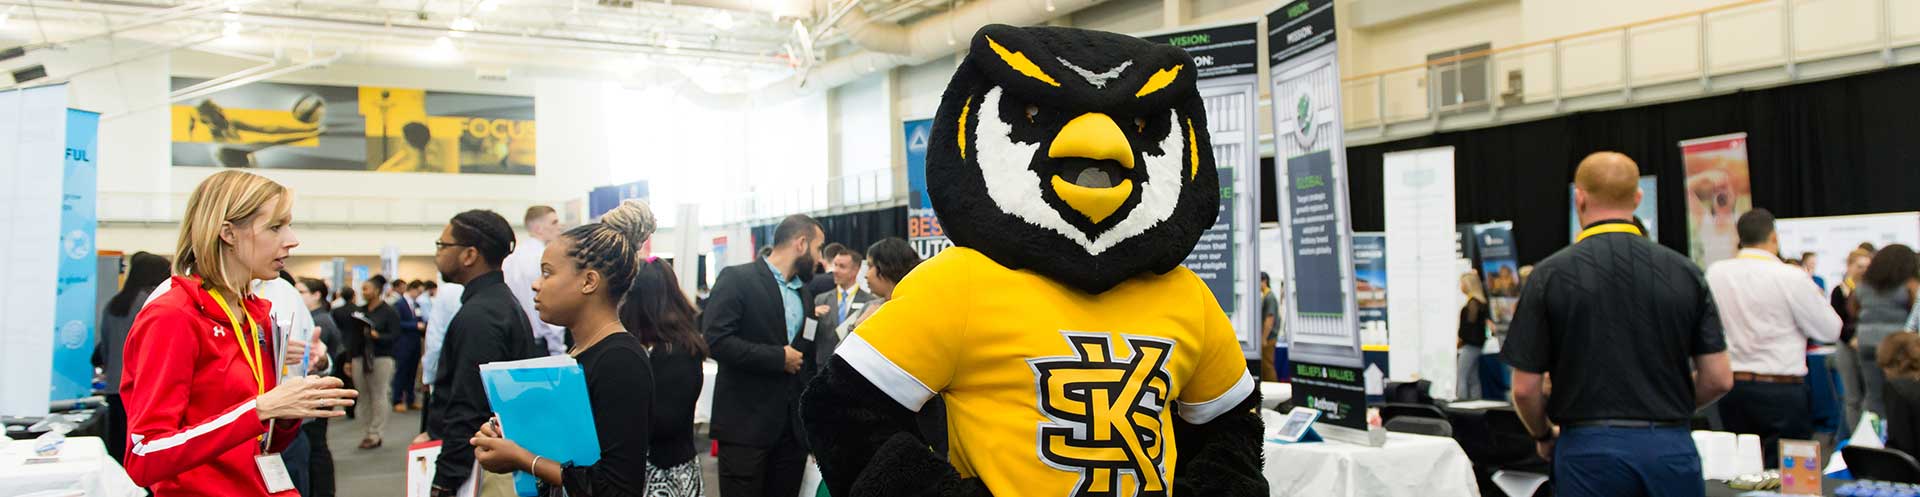 scrappy and һҹƵ students at career fair